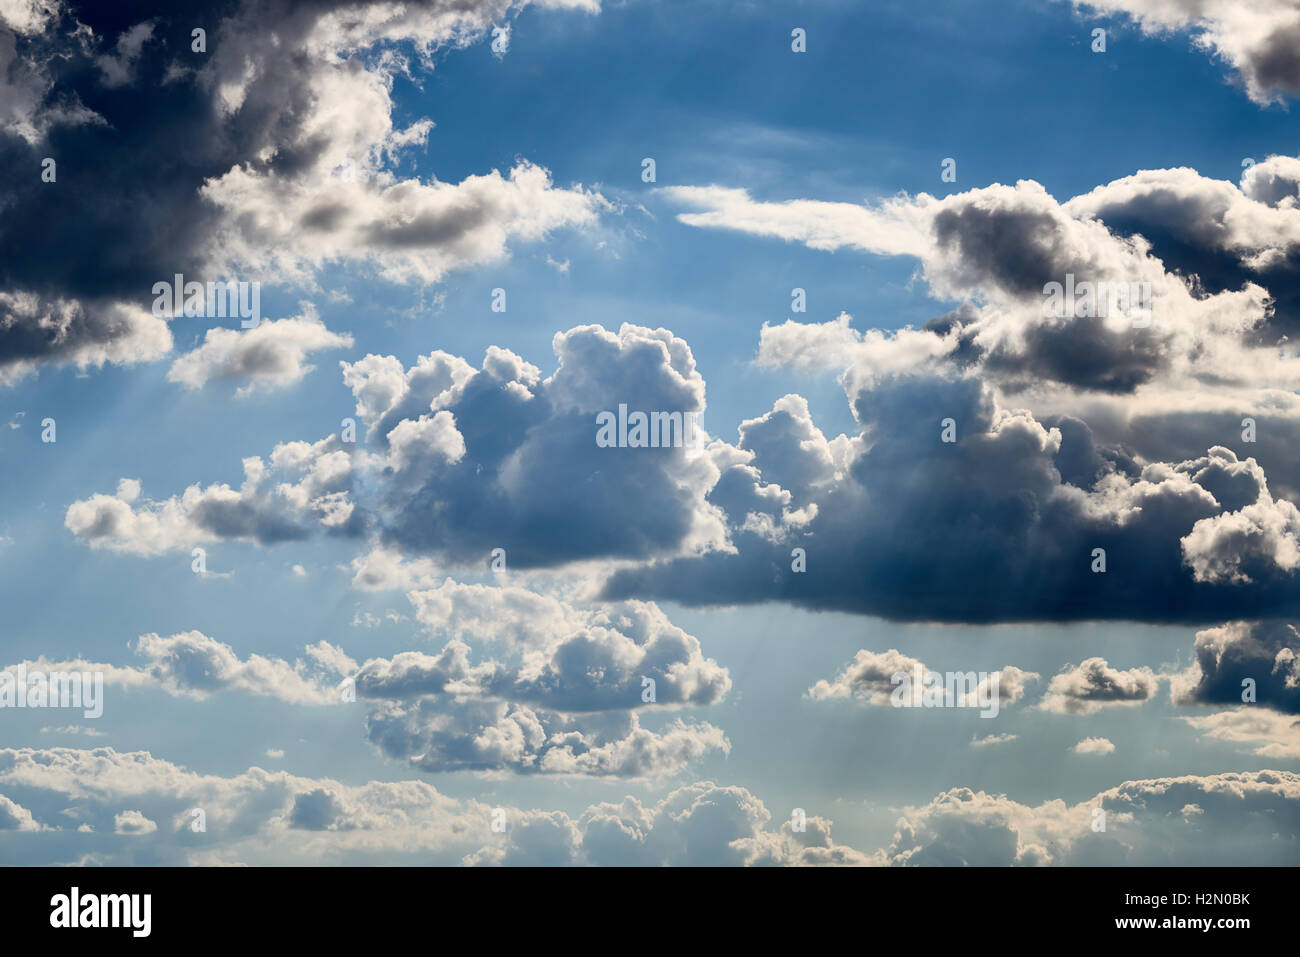 Vivid and dramatic clouds with blue sky shining through. Stock Photo